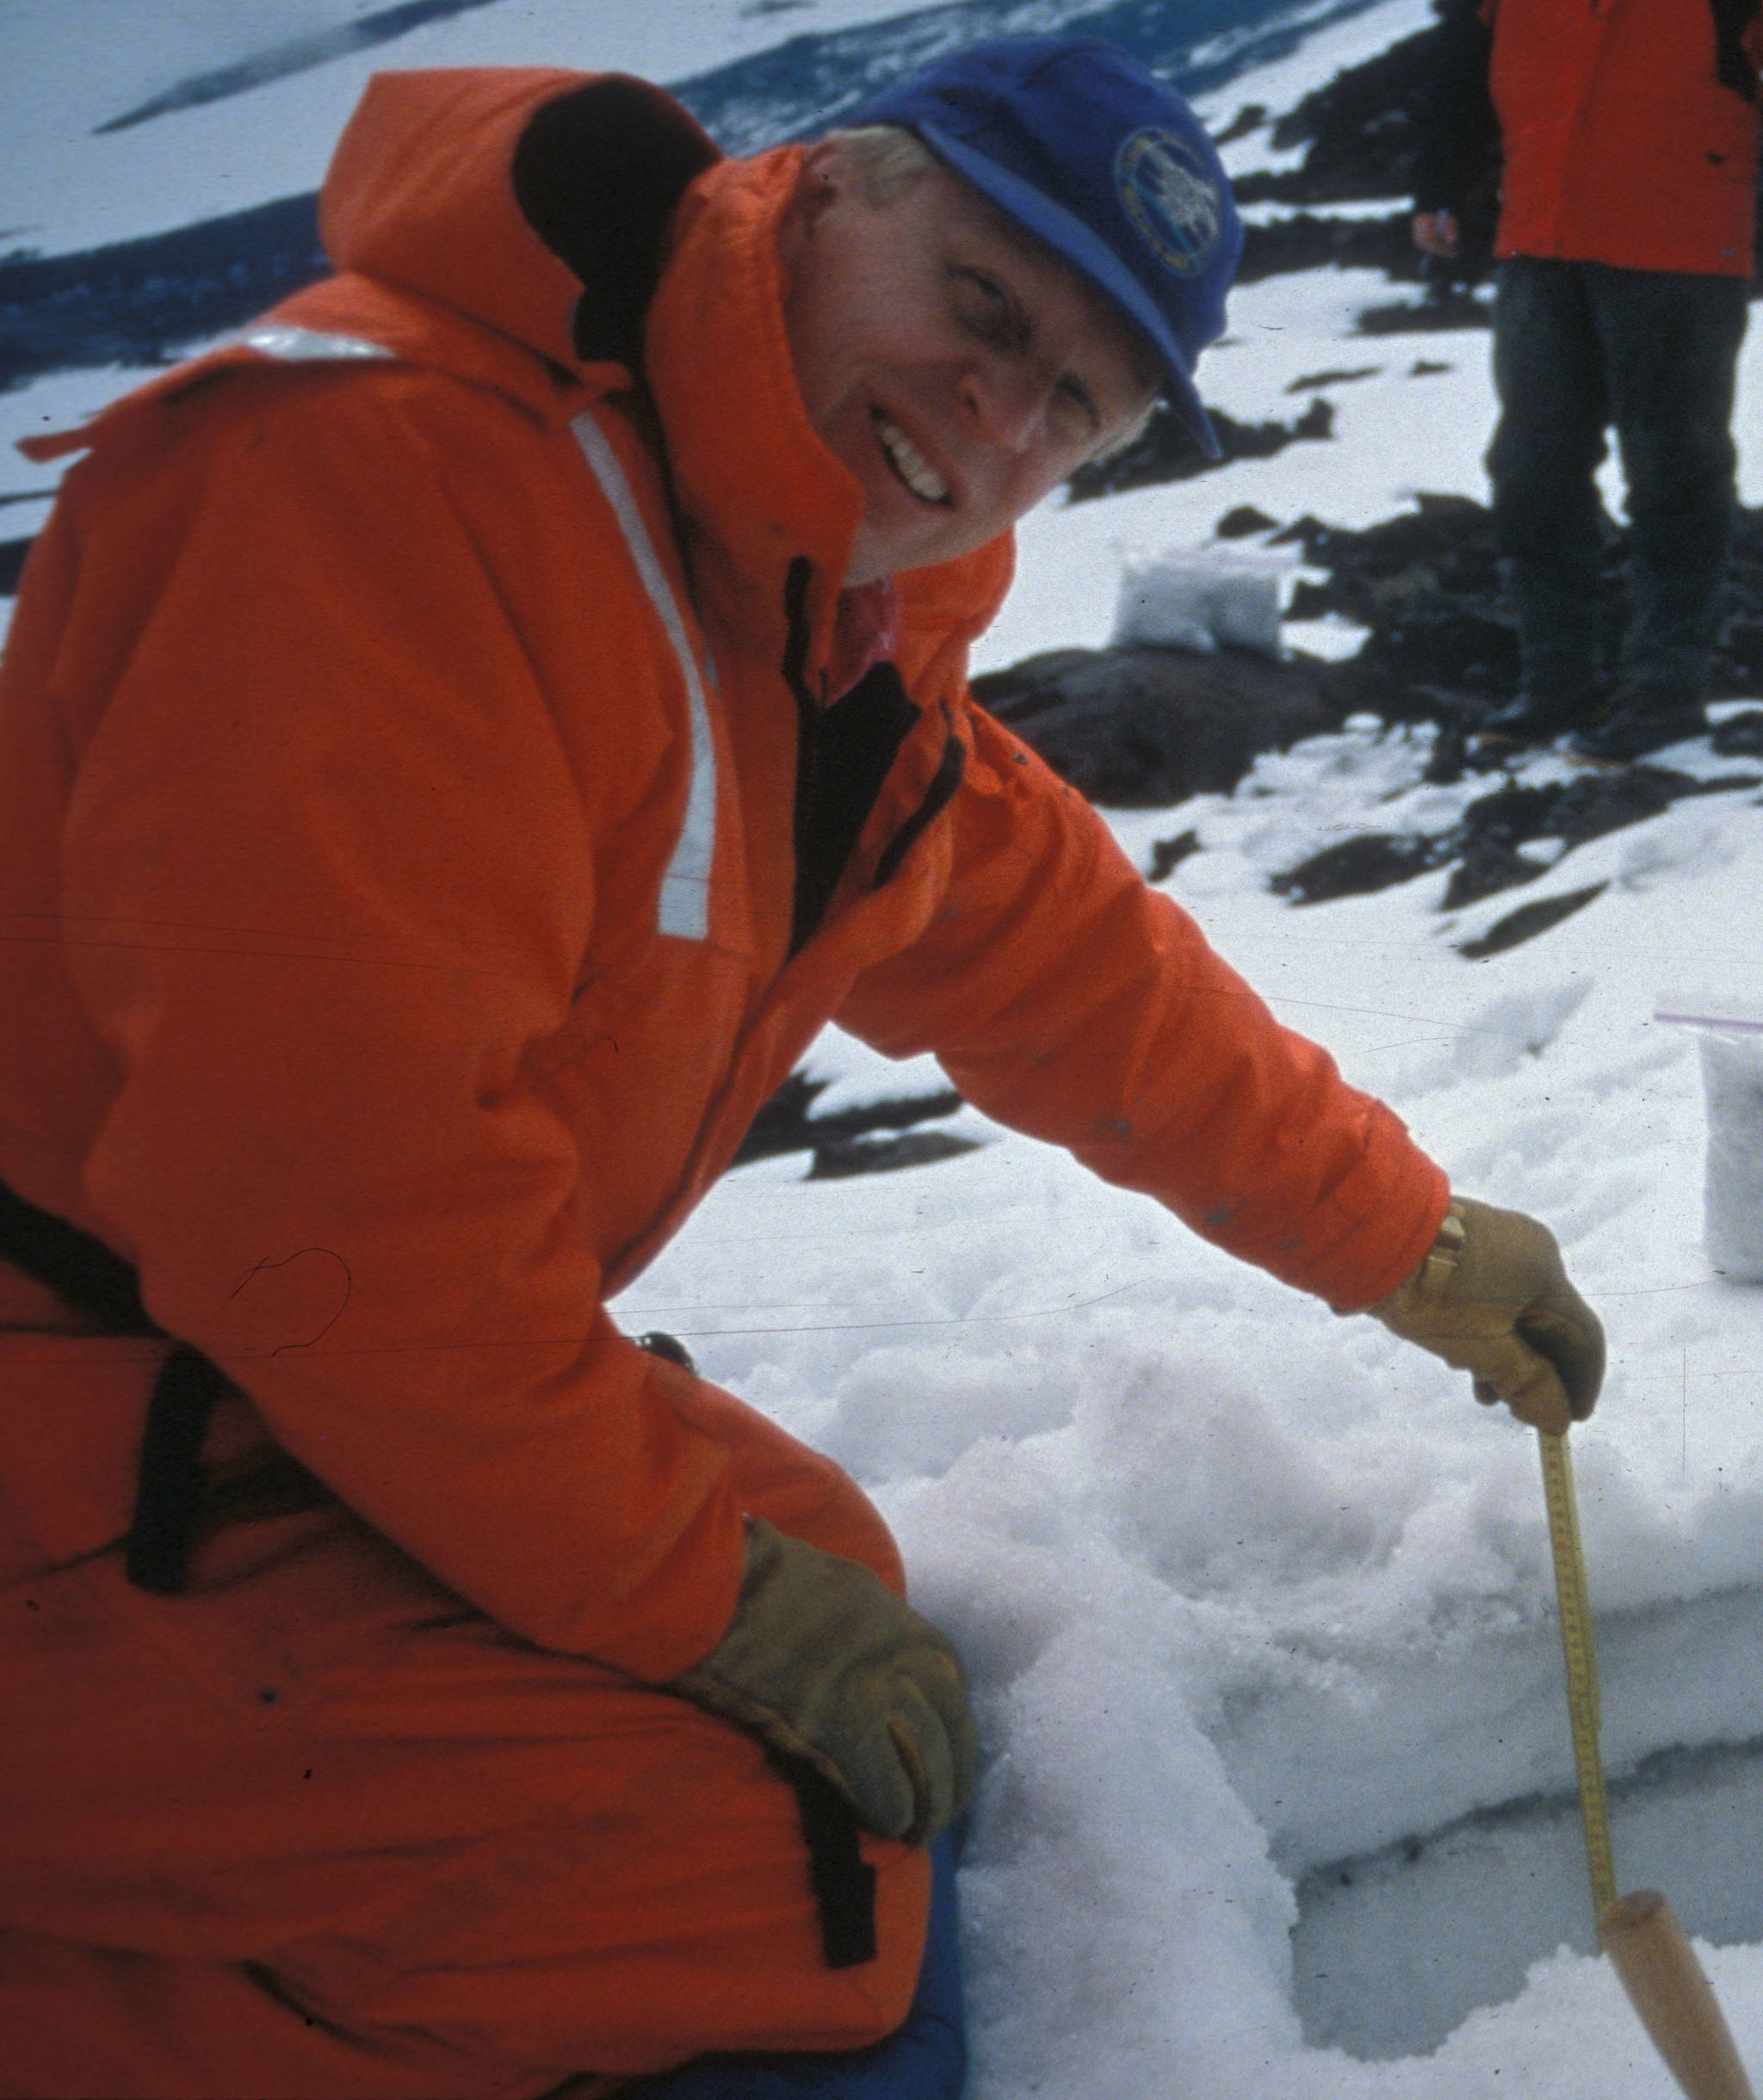 Guy Tytgat measures ash on Shishaldin Volcano after an eruption there in the late 1990s. (Courtesy Photo / Jim Beget, Alaska Volcano Observatory)